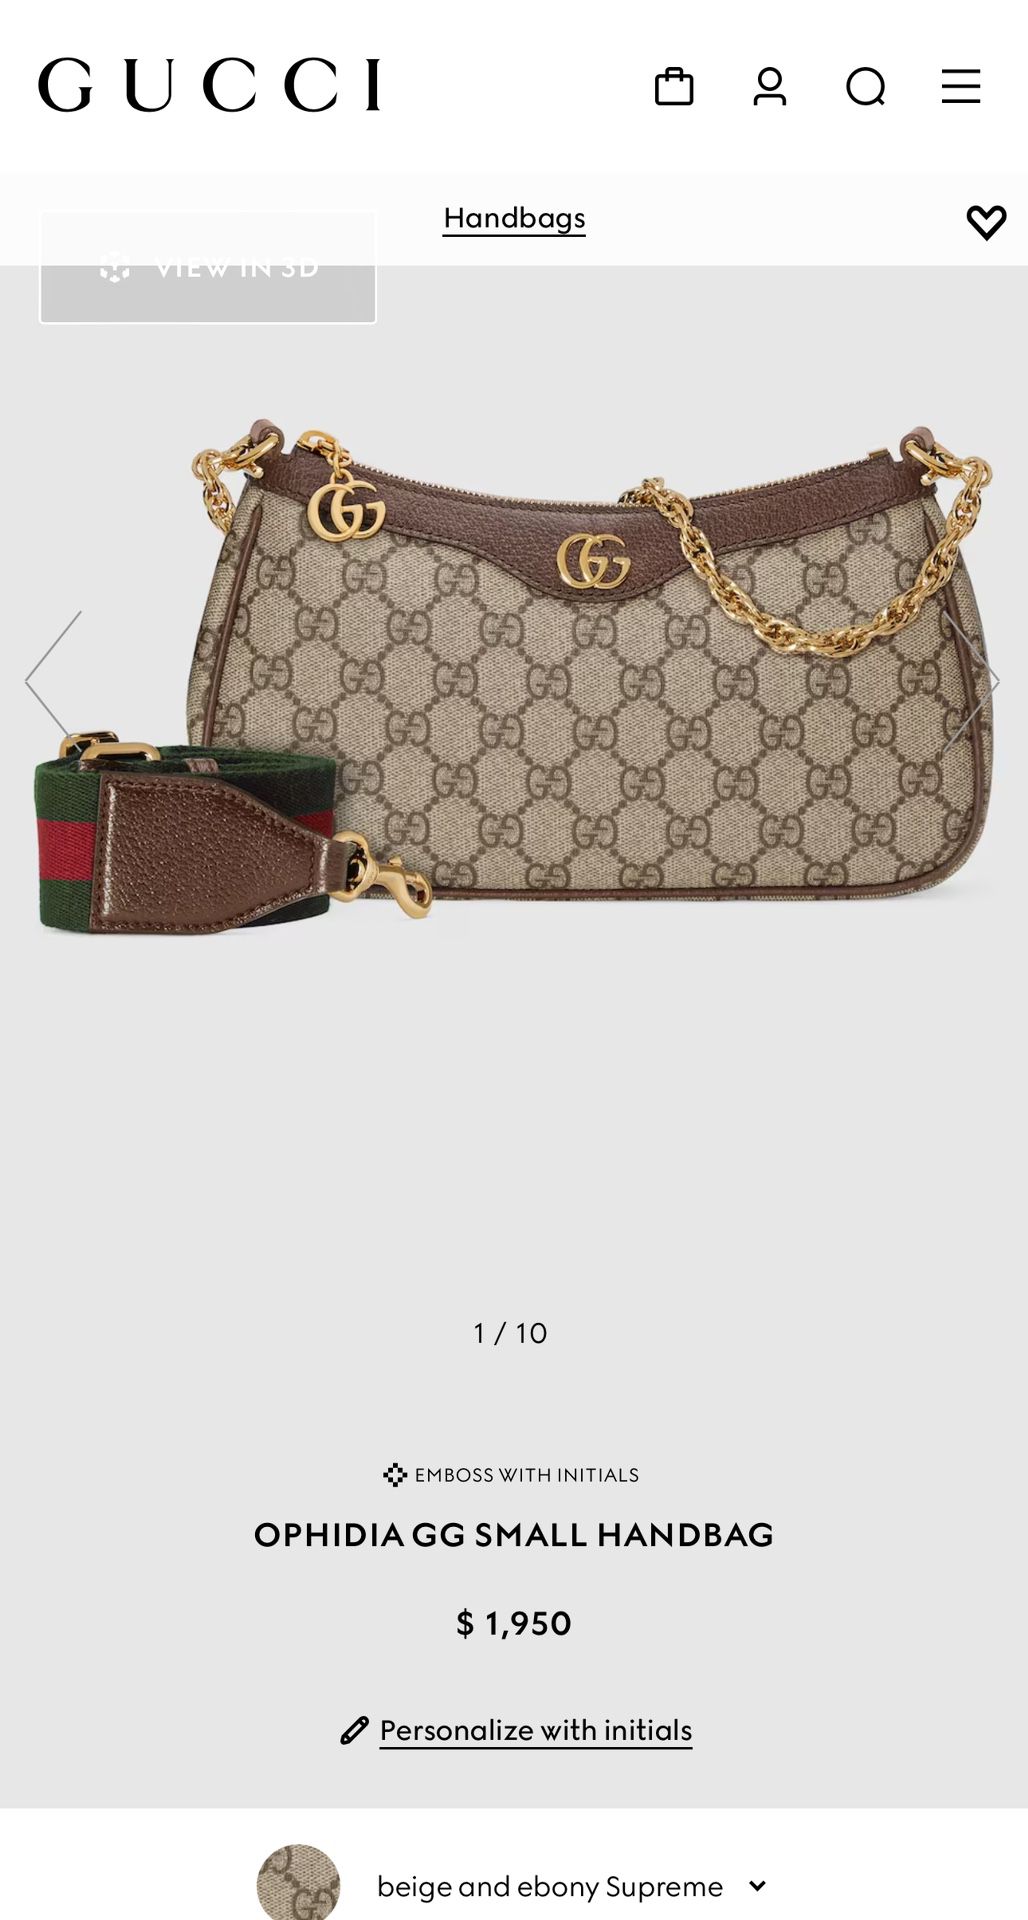 Authentic GUCCI Ophidia